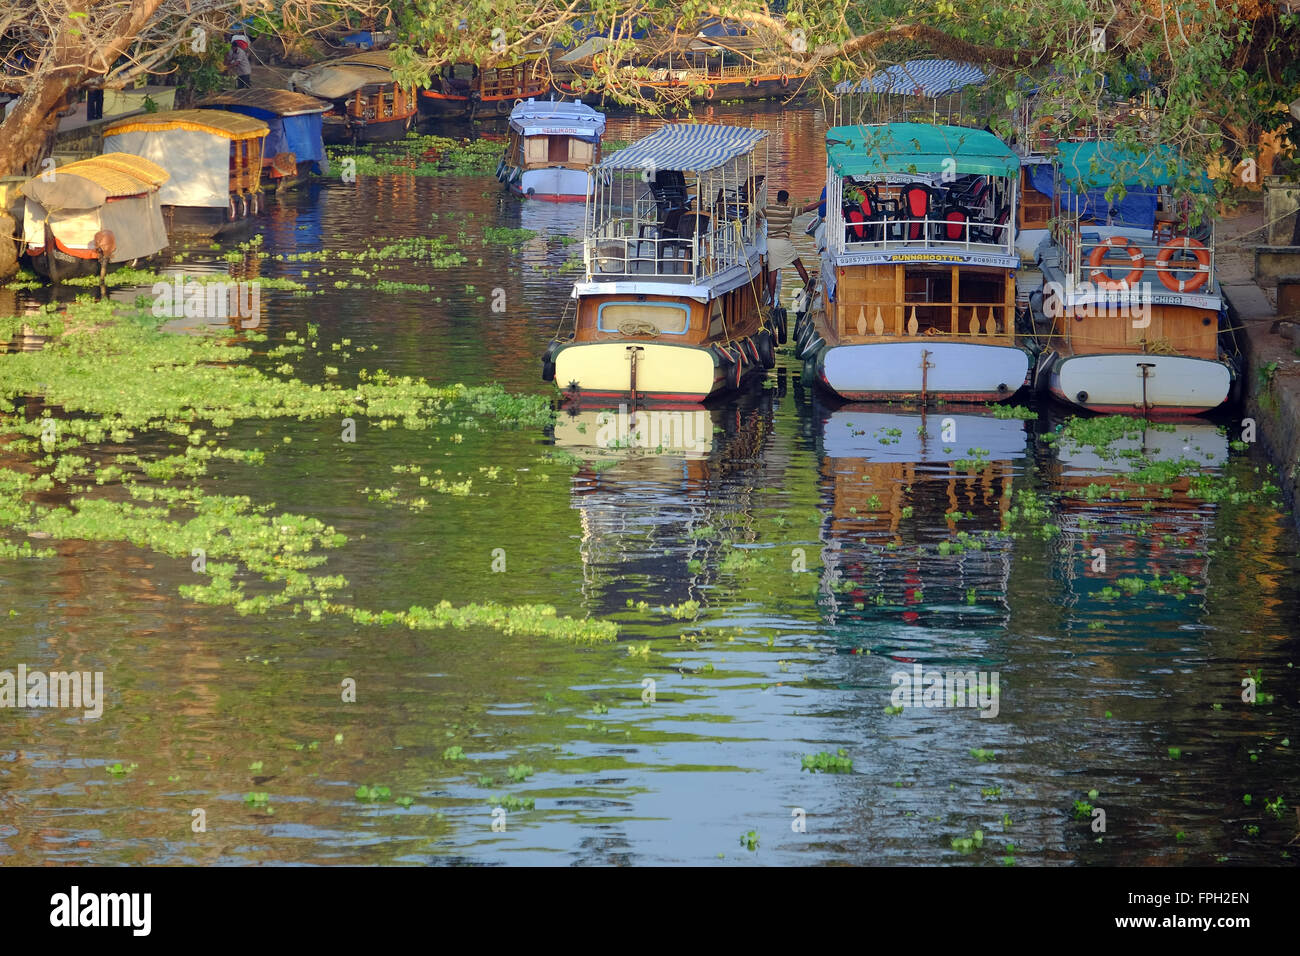 Tourist boats on a canal in the town of Aleppey (Alappuzha) in Kerala, India Stock Photo